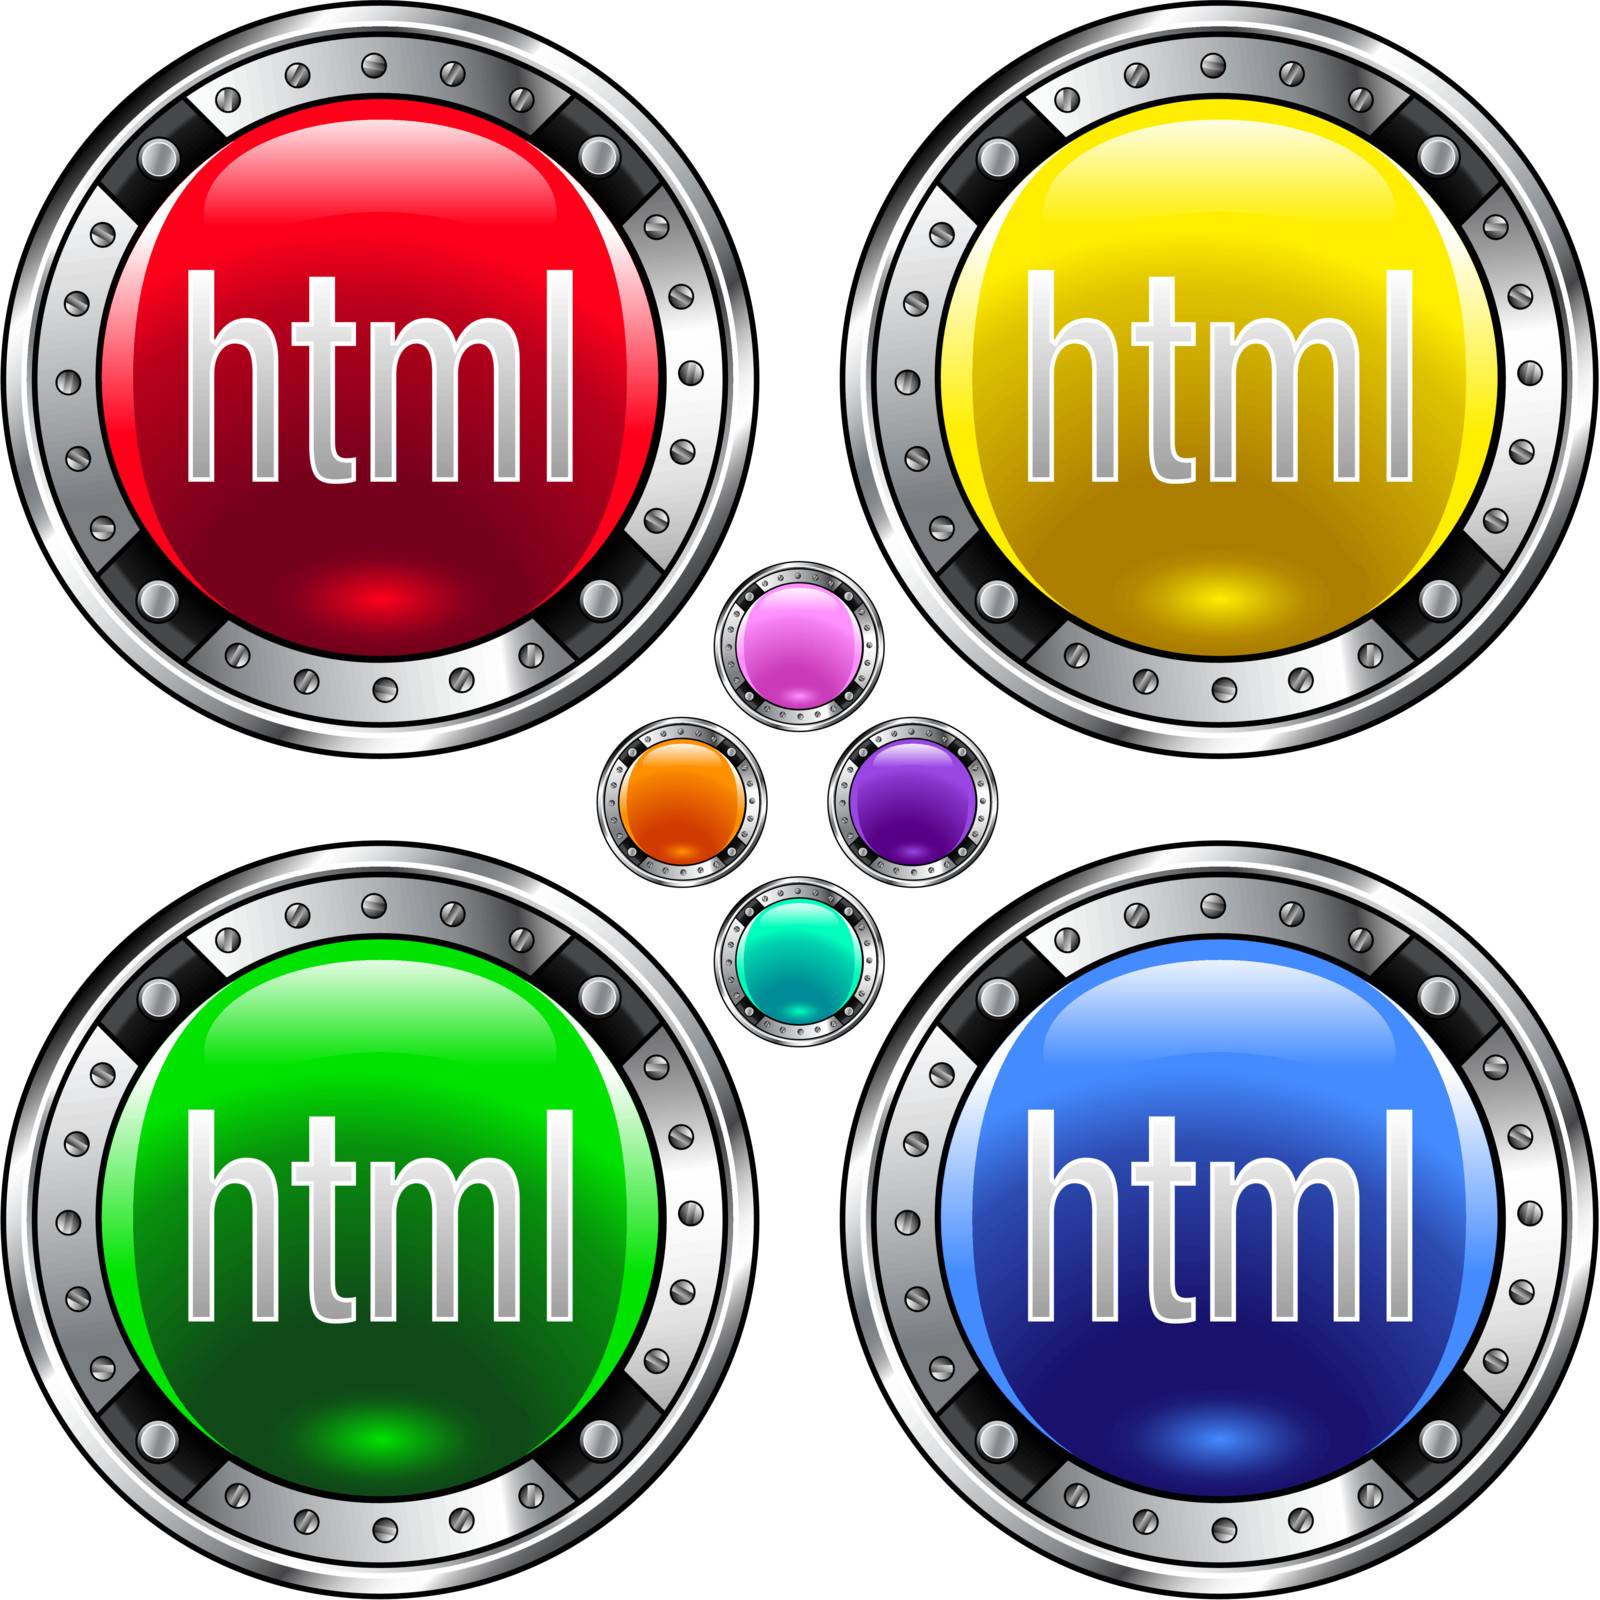 HTML file extension icon on round colorful vector buttons suitable for use on websites, in print materials or in advertisements. Set includes red, yellow, green, and blue versions.